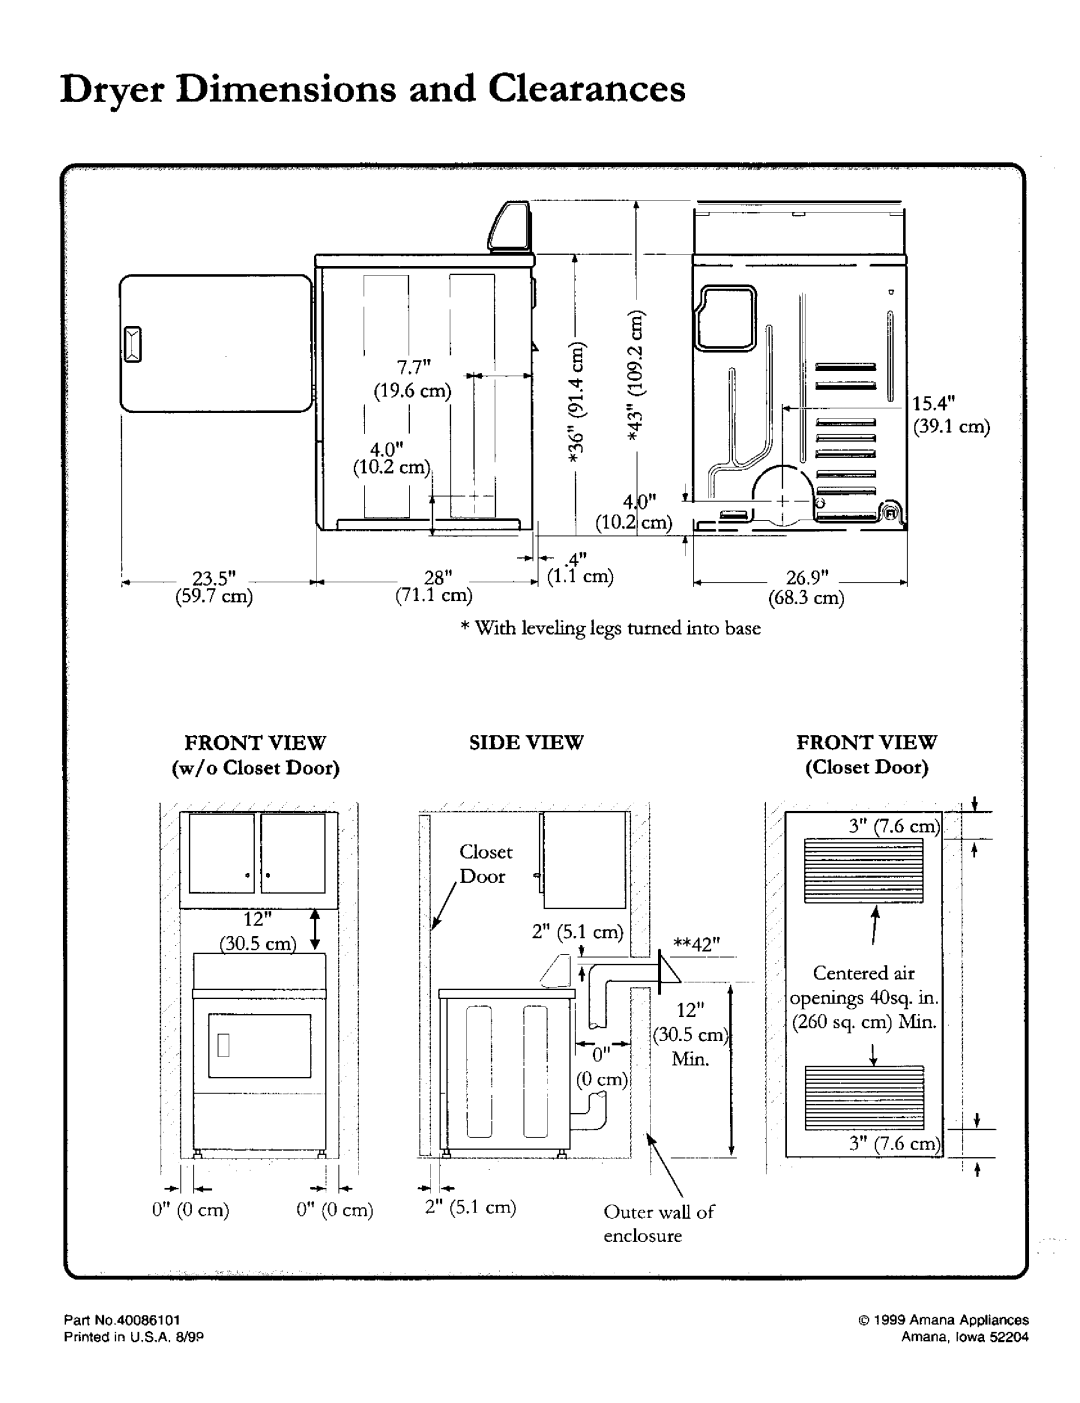 Amana 40086101 owner manual Dryer Dimensions and Clearances, Closet, Door, 2 5.1 cm 